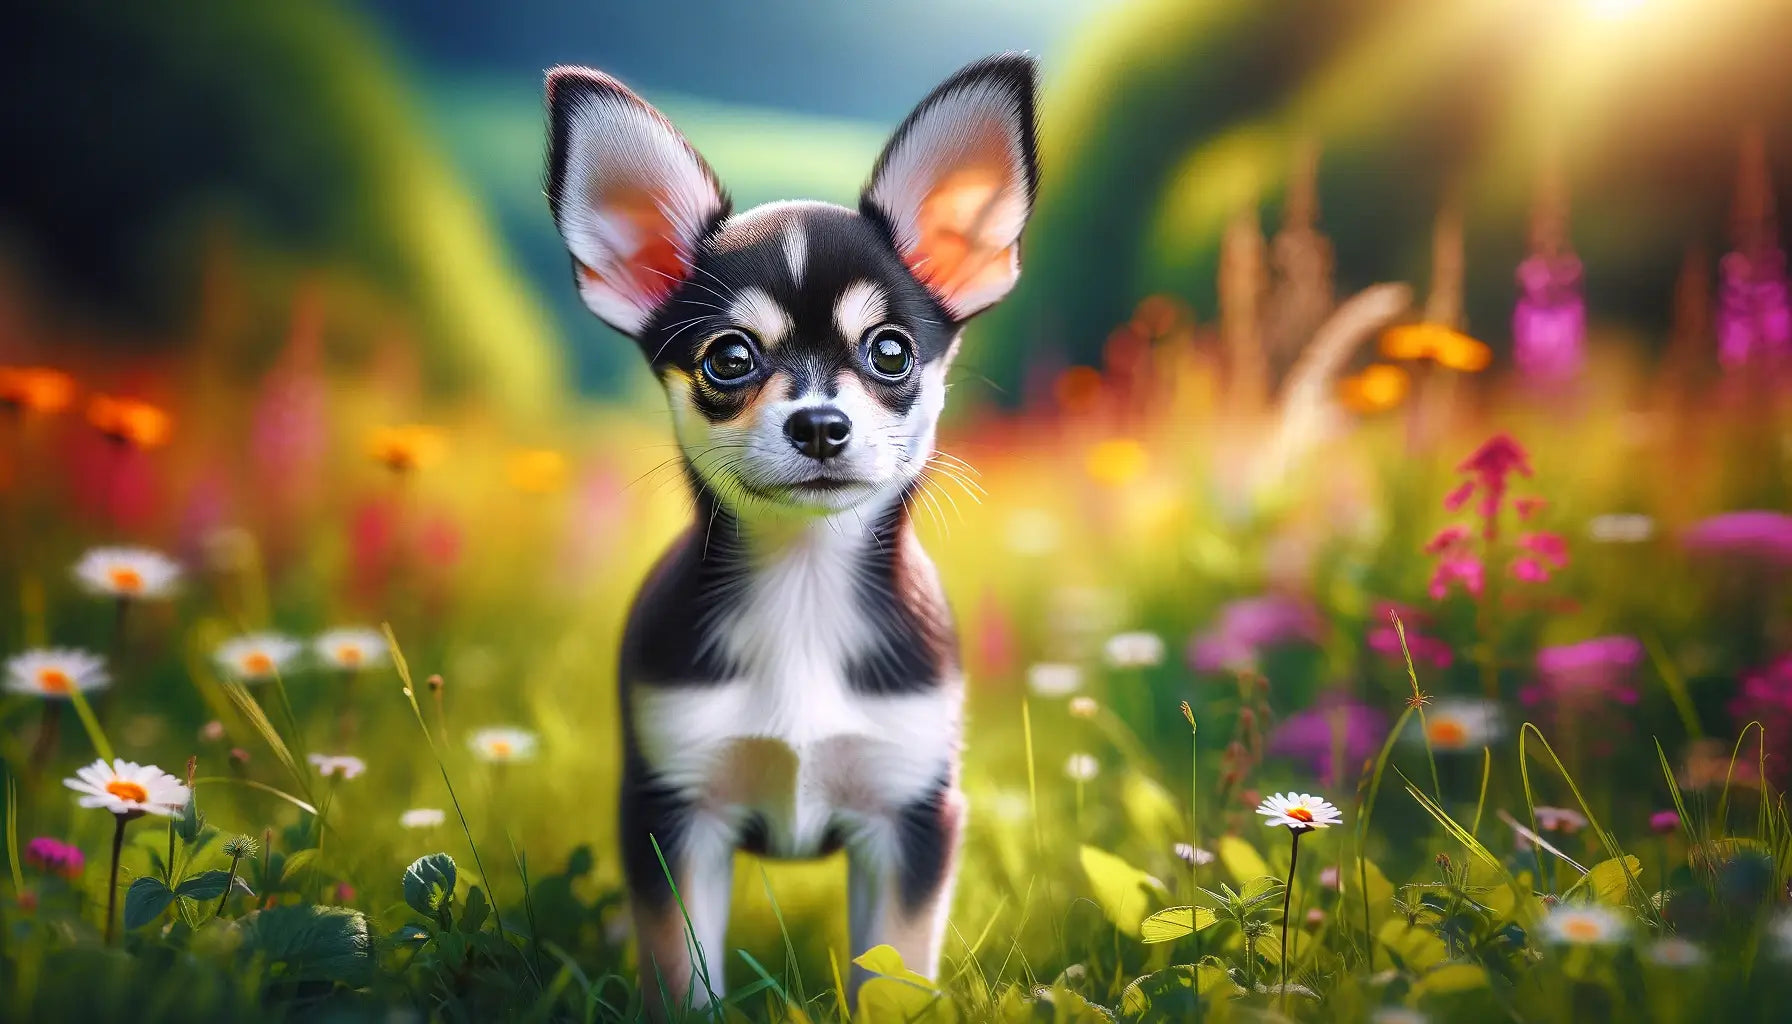 A Chihuahua Husky Mix puppy with large pointed ears standing alert in a grassy field. Its black and white markings and bright eyes capture attention.